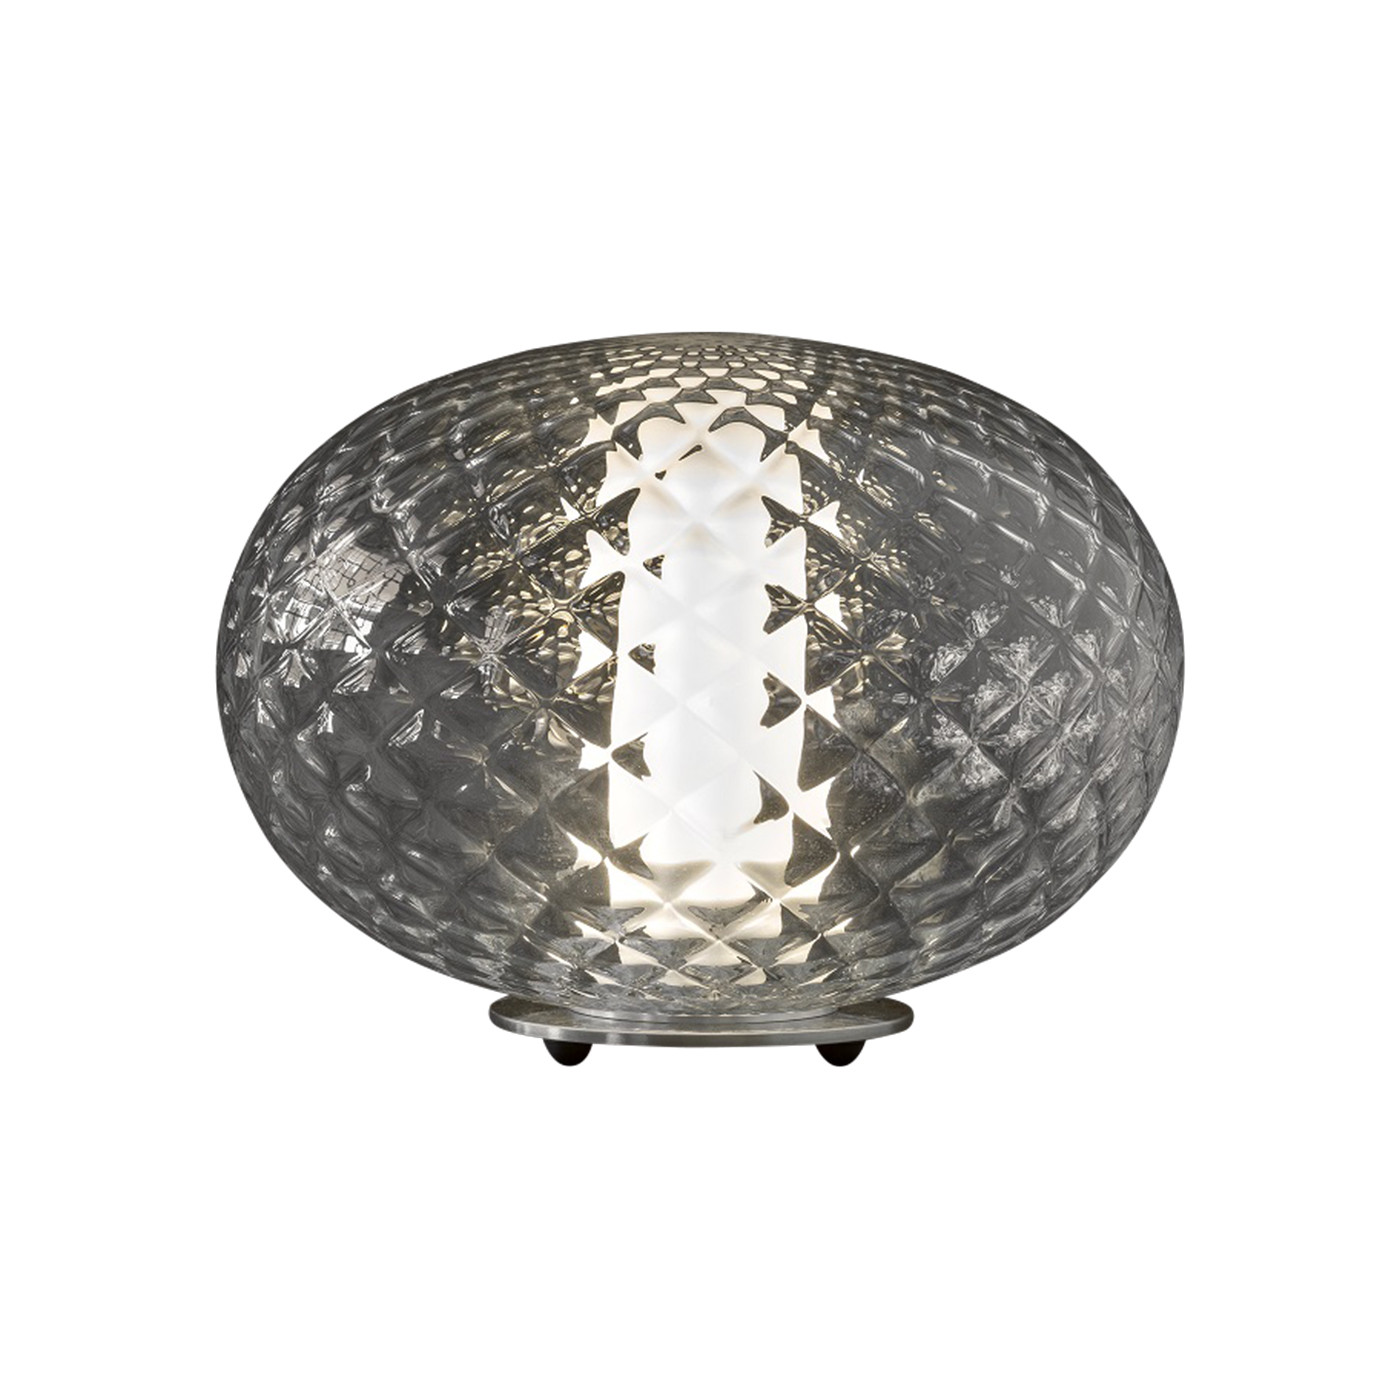 Oluce Recuerdo 284 At Nostraforma, How To Earth A Metal Table Lamp